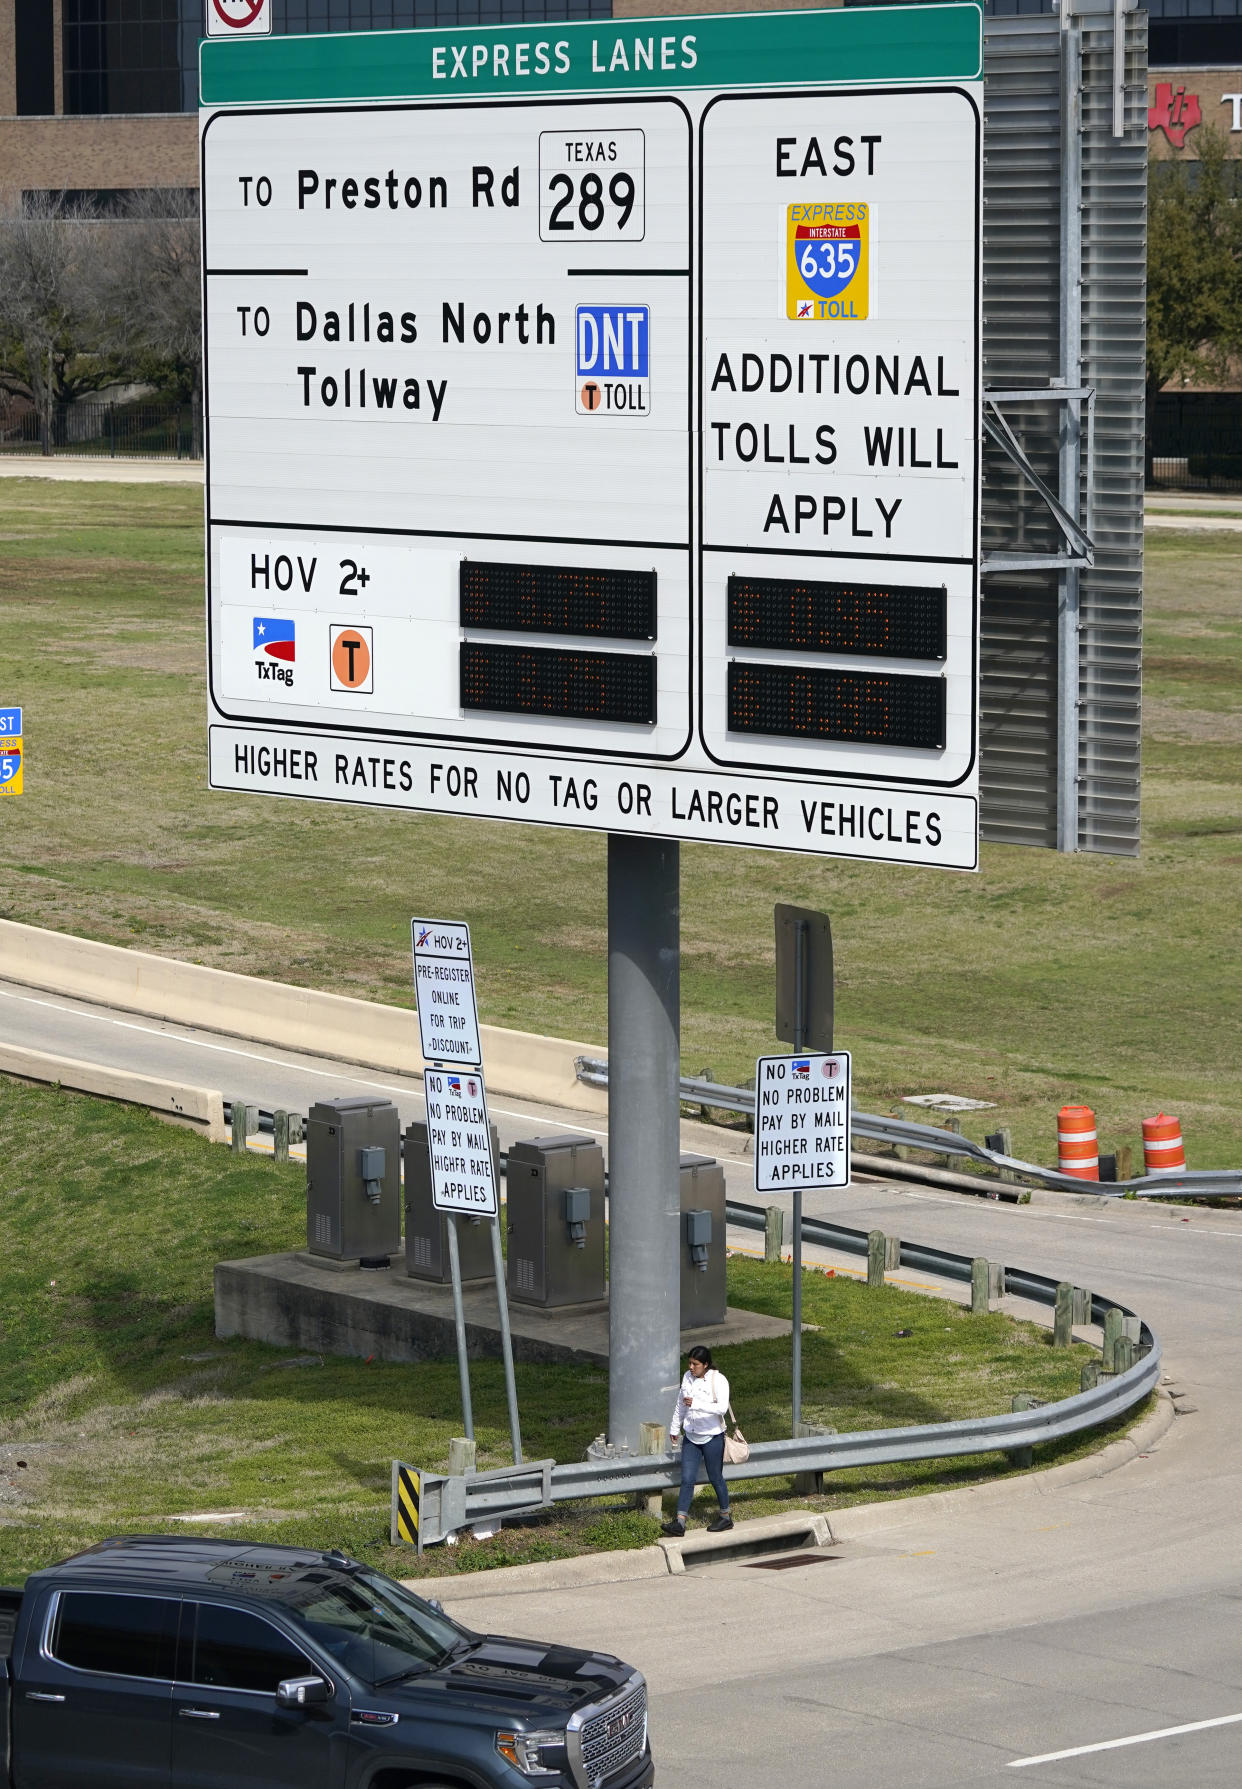 An express lanes highway sign marks an entrance in Dallas, Friday, March 3, 2023. There is growing interest in the South in fee-based express lanes in which some drivers can up to avoid congestion on highways where other drivers can access general lanes for free. (AP Photo/LM Otero)